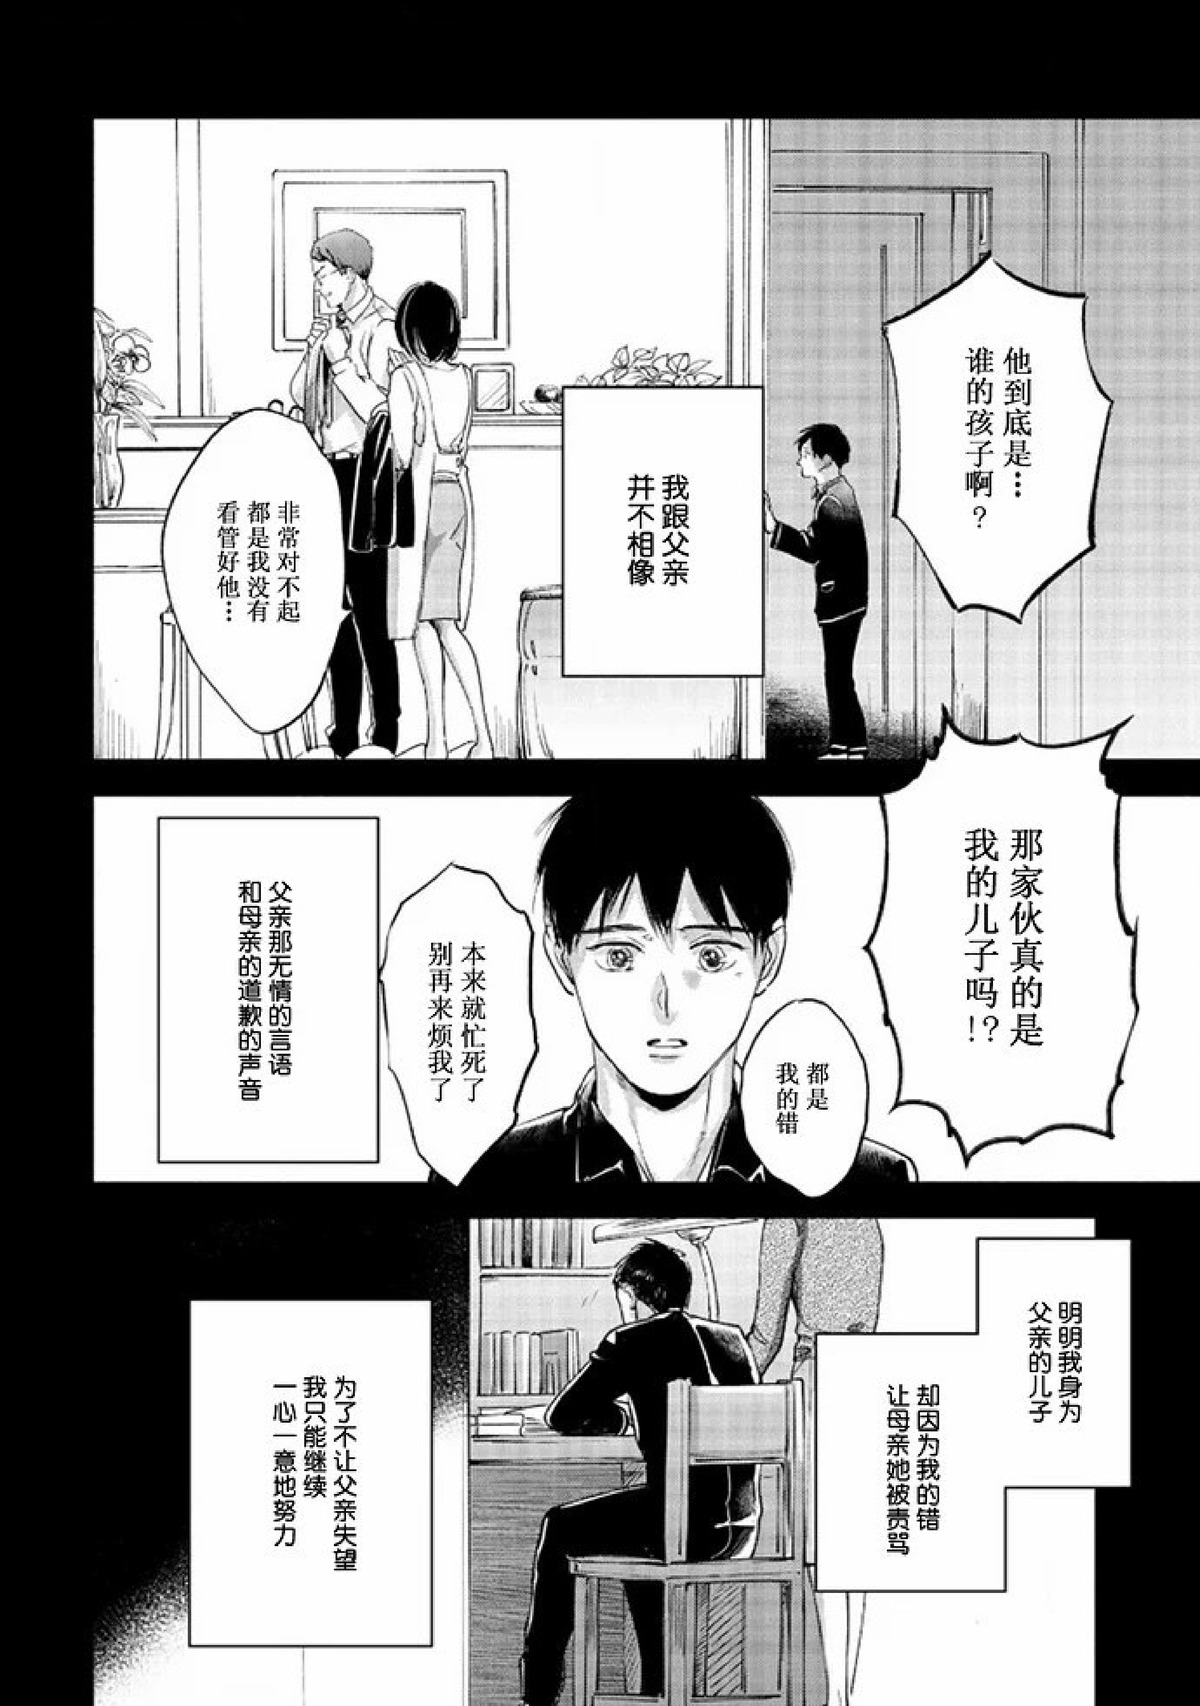 【Two sides of the same coin[腐漫]】漫画-（上卷01-02）章节漫画下拉式图片-22.jpg